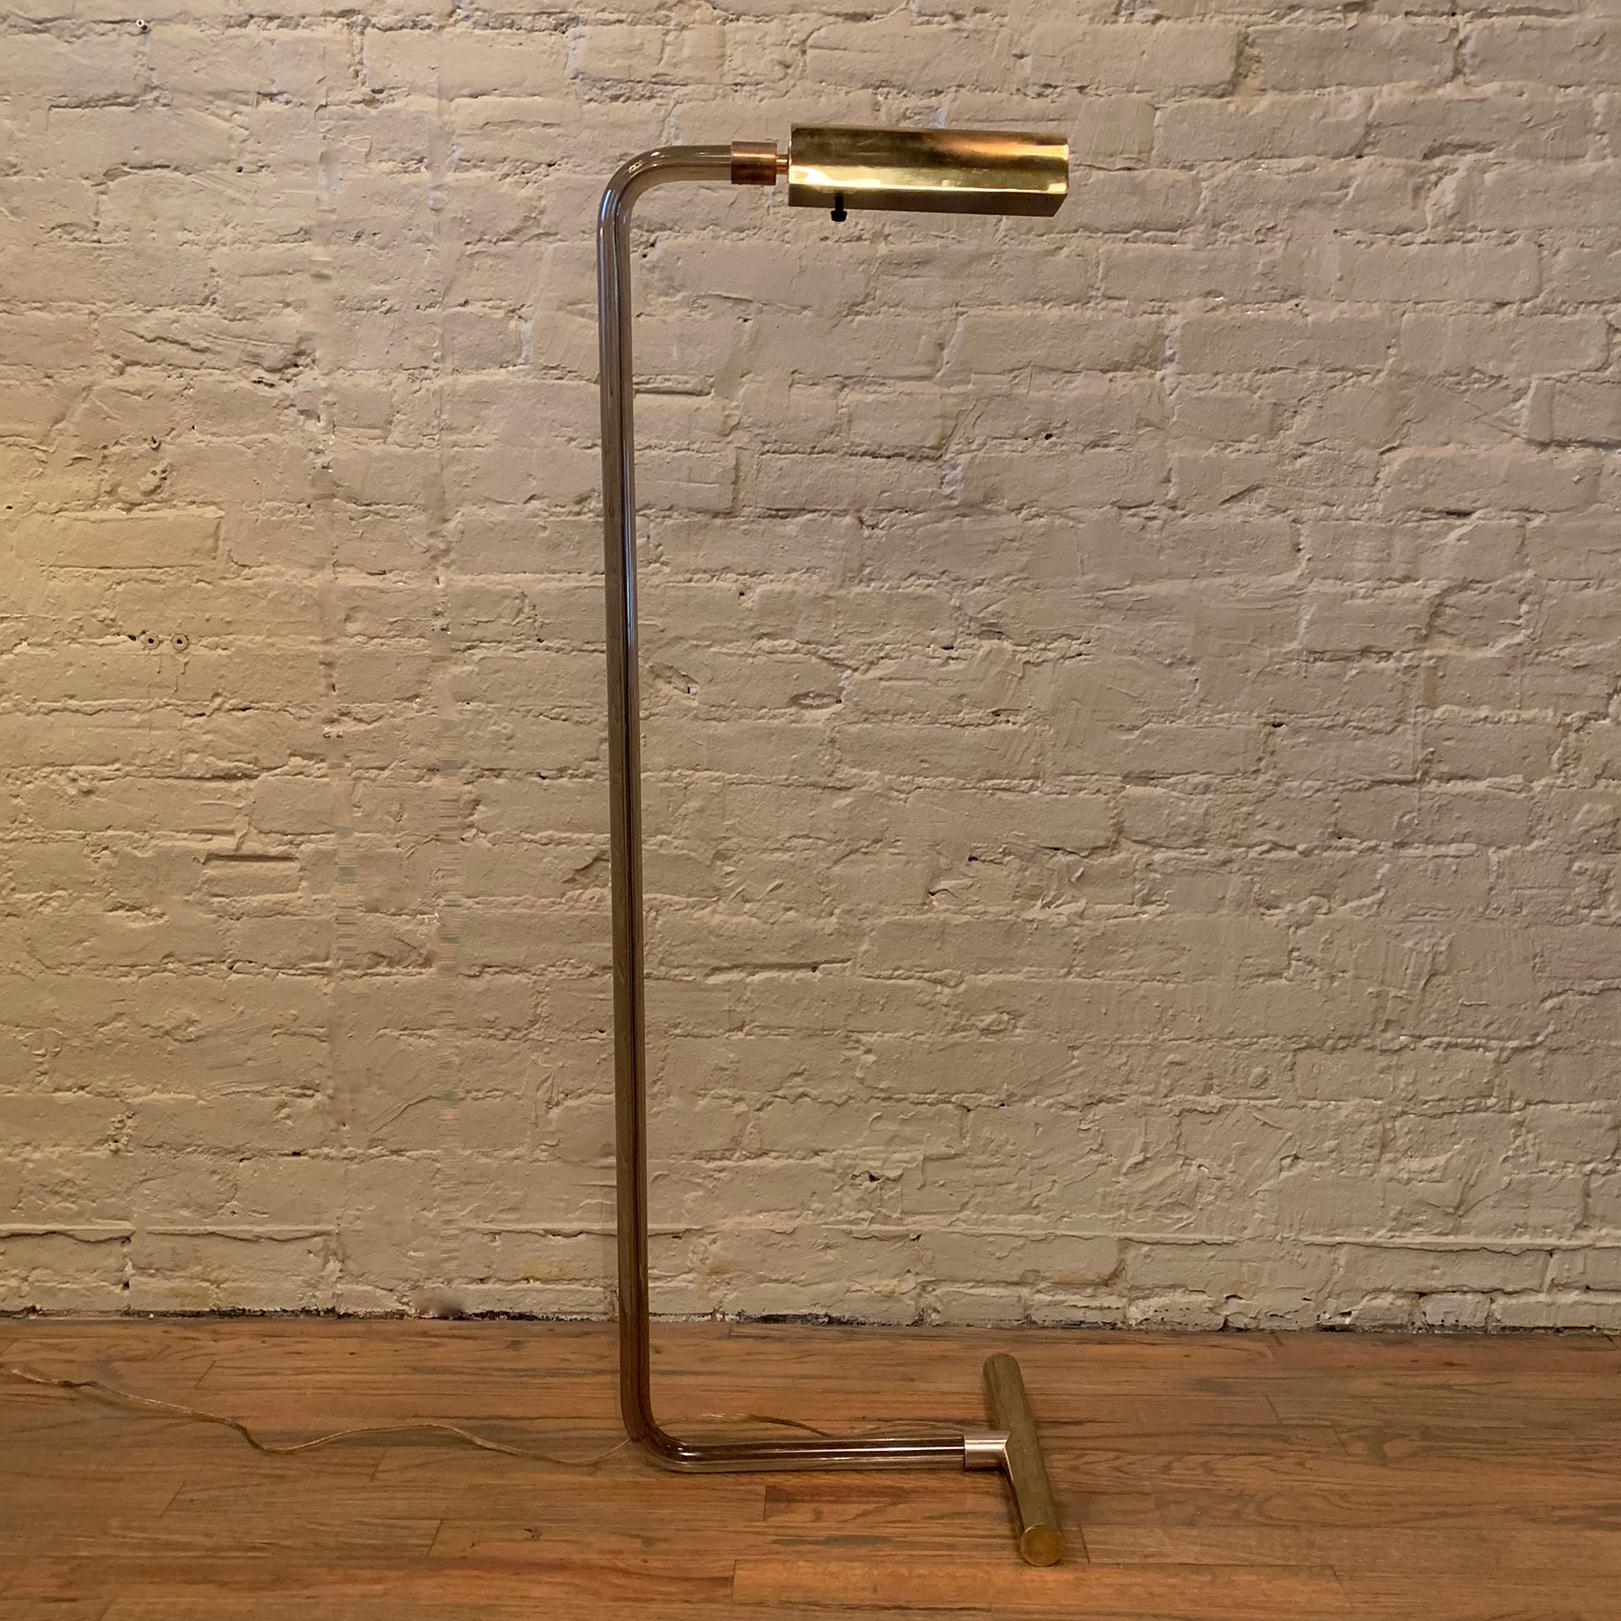 Modernist floor lamp by Peter Hamburger for George Kovacs features a curved, tubular smoked Lucite stem with brass shade and counterbalance. The shade circulates from reading position to up light.